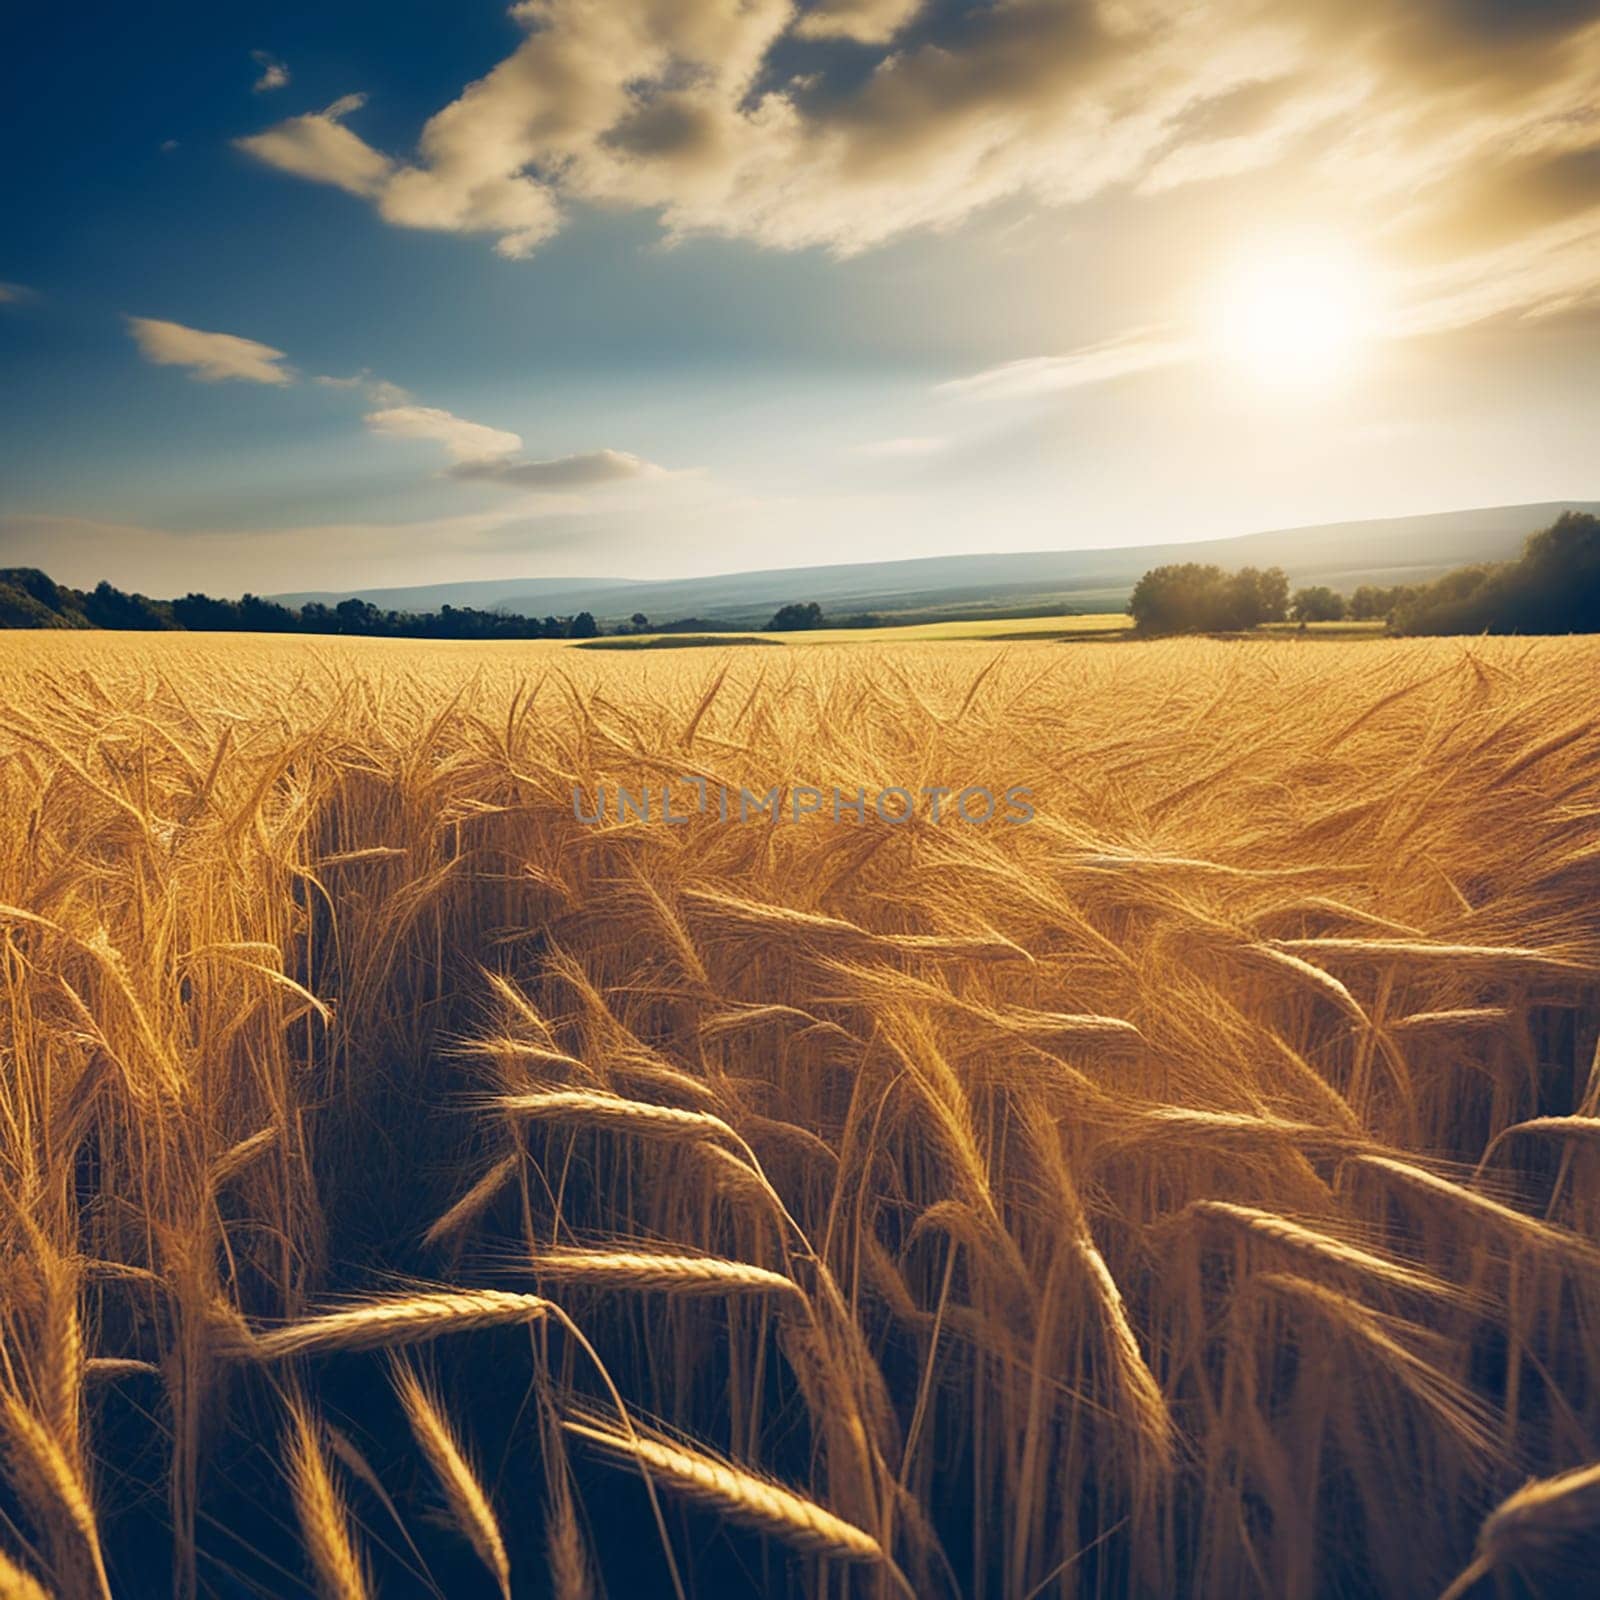 Fields of Gold: A Serene Day in the Wheat Fields by Petrichor